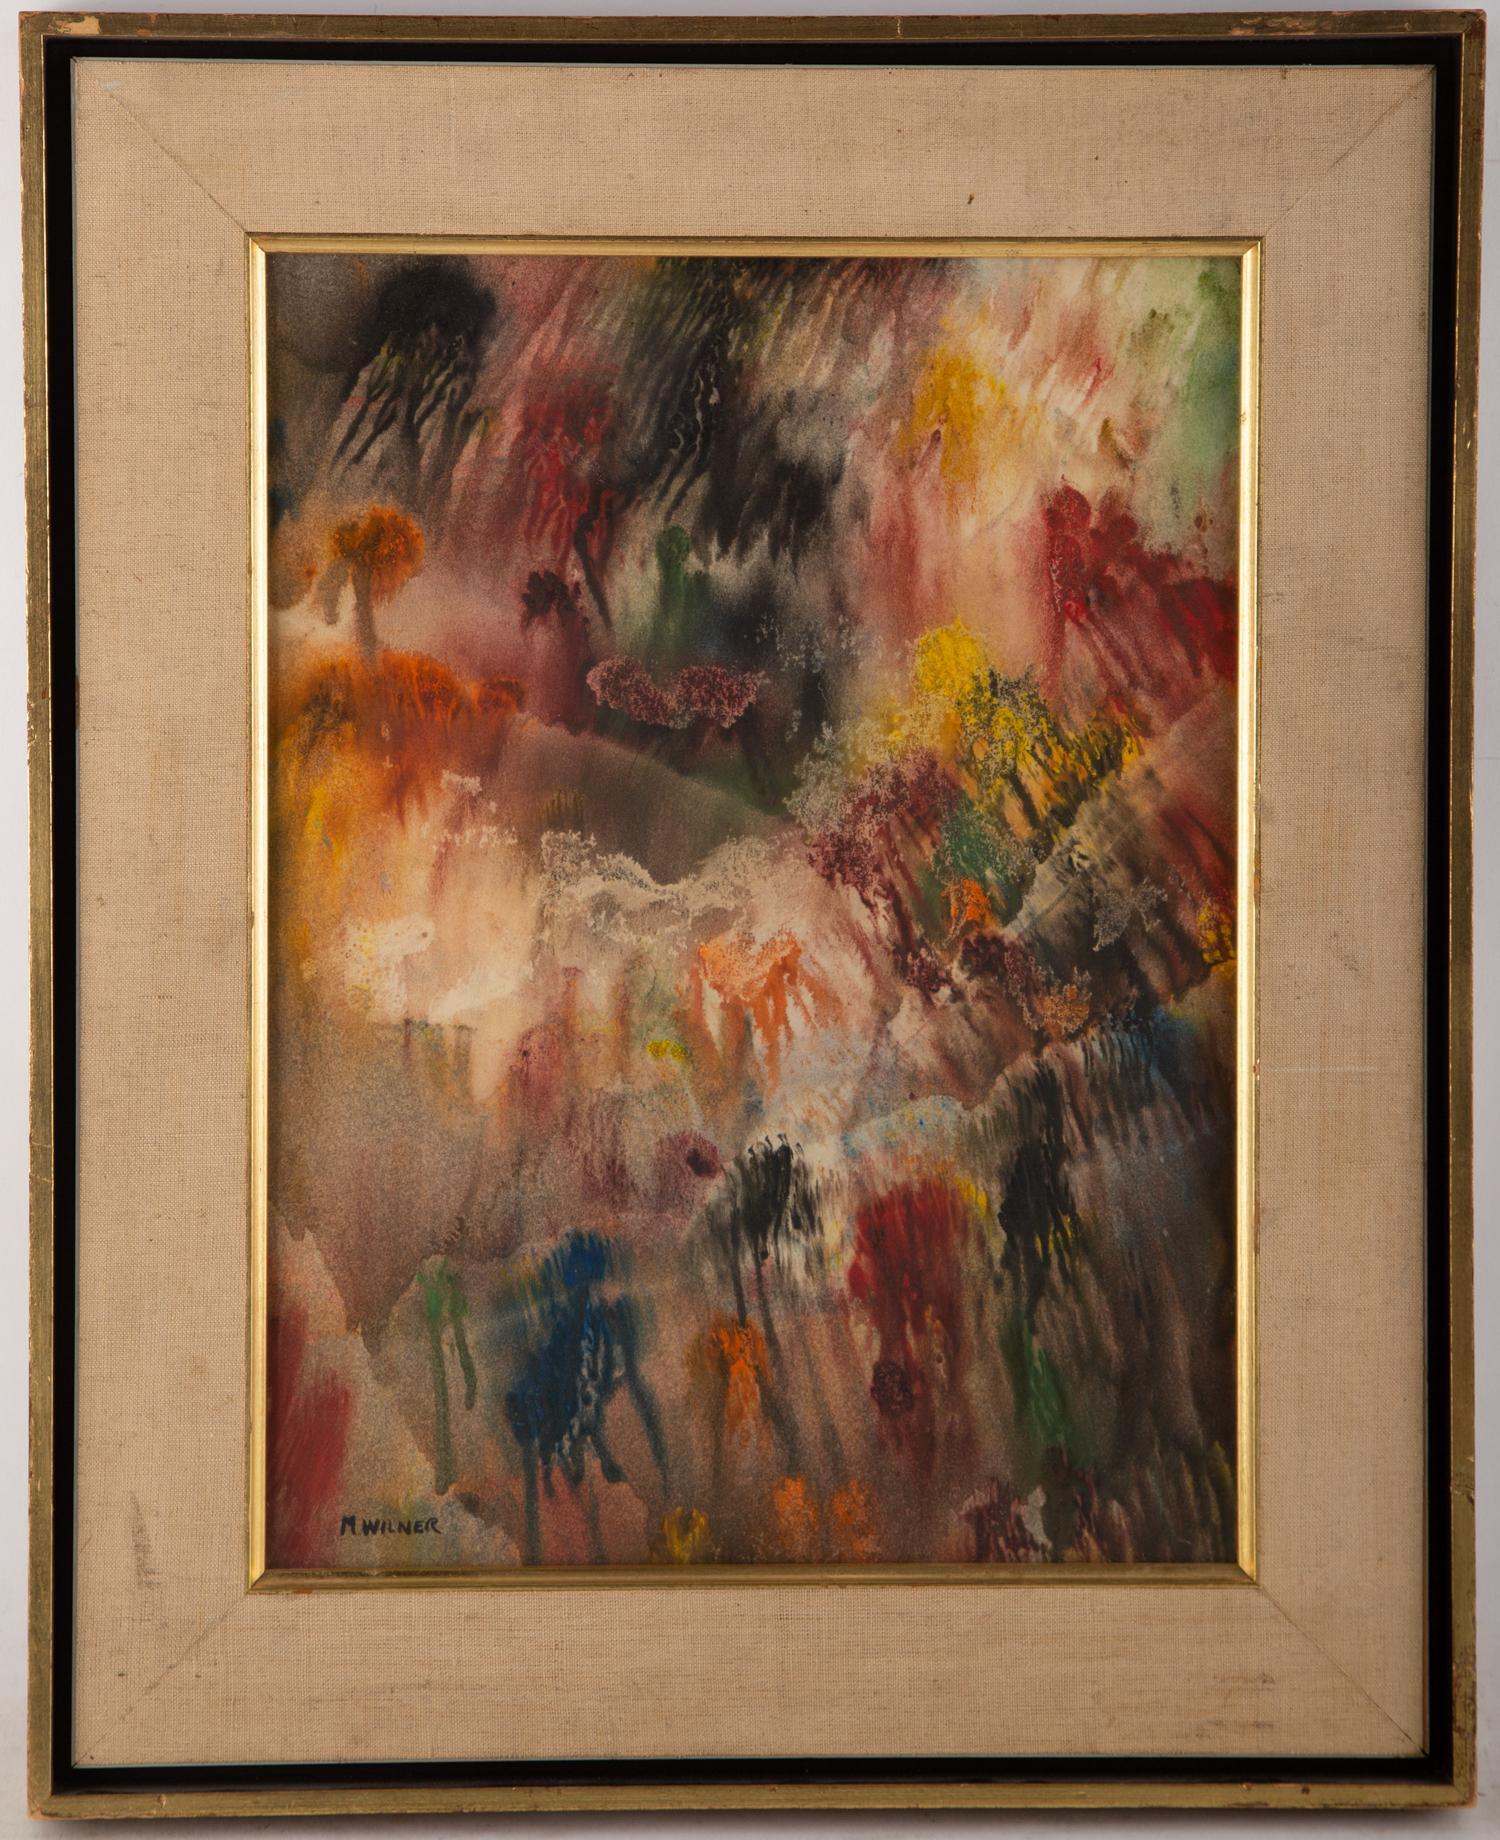 Marie Wilner (Born 1910) New York
Medium: Oil / Board
Frame Size: 19.5" x 16"
Size: 17.5" x 14"
Condition: great, no visible damage
Provenance: Private Collection from New York